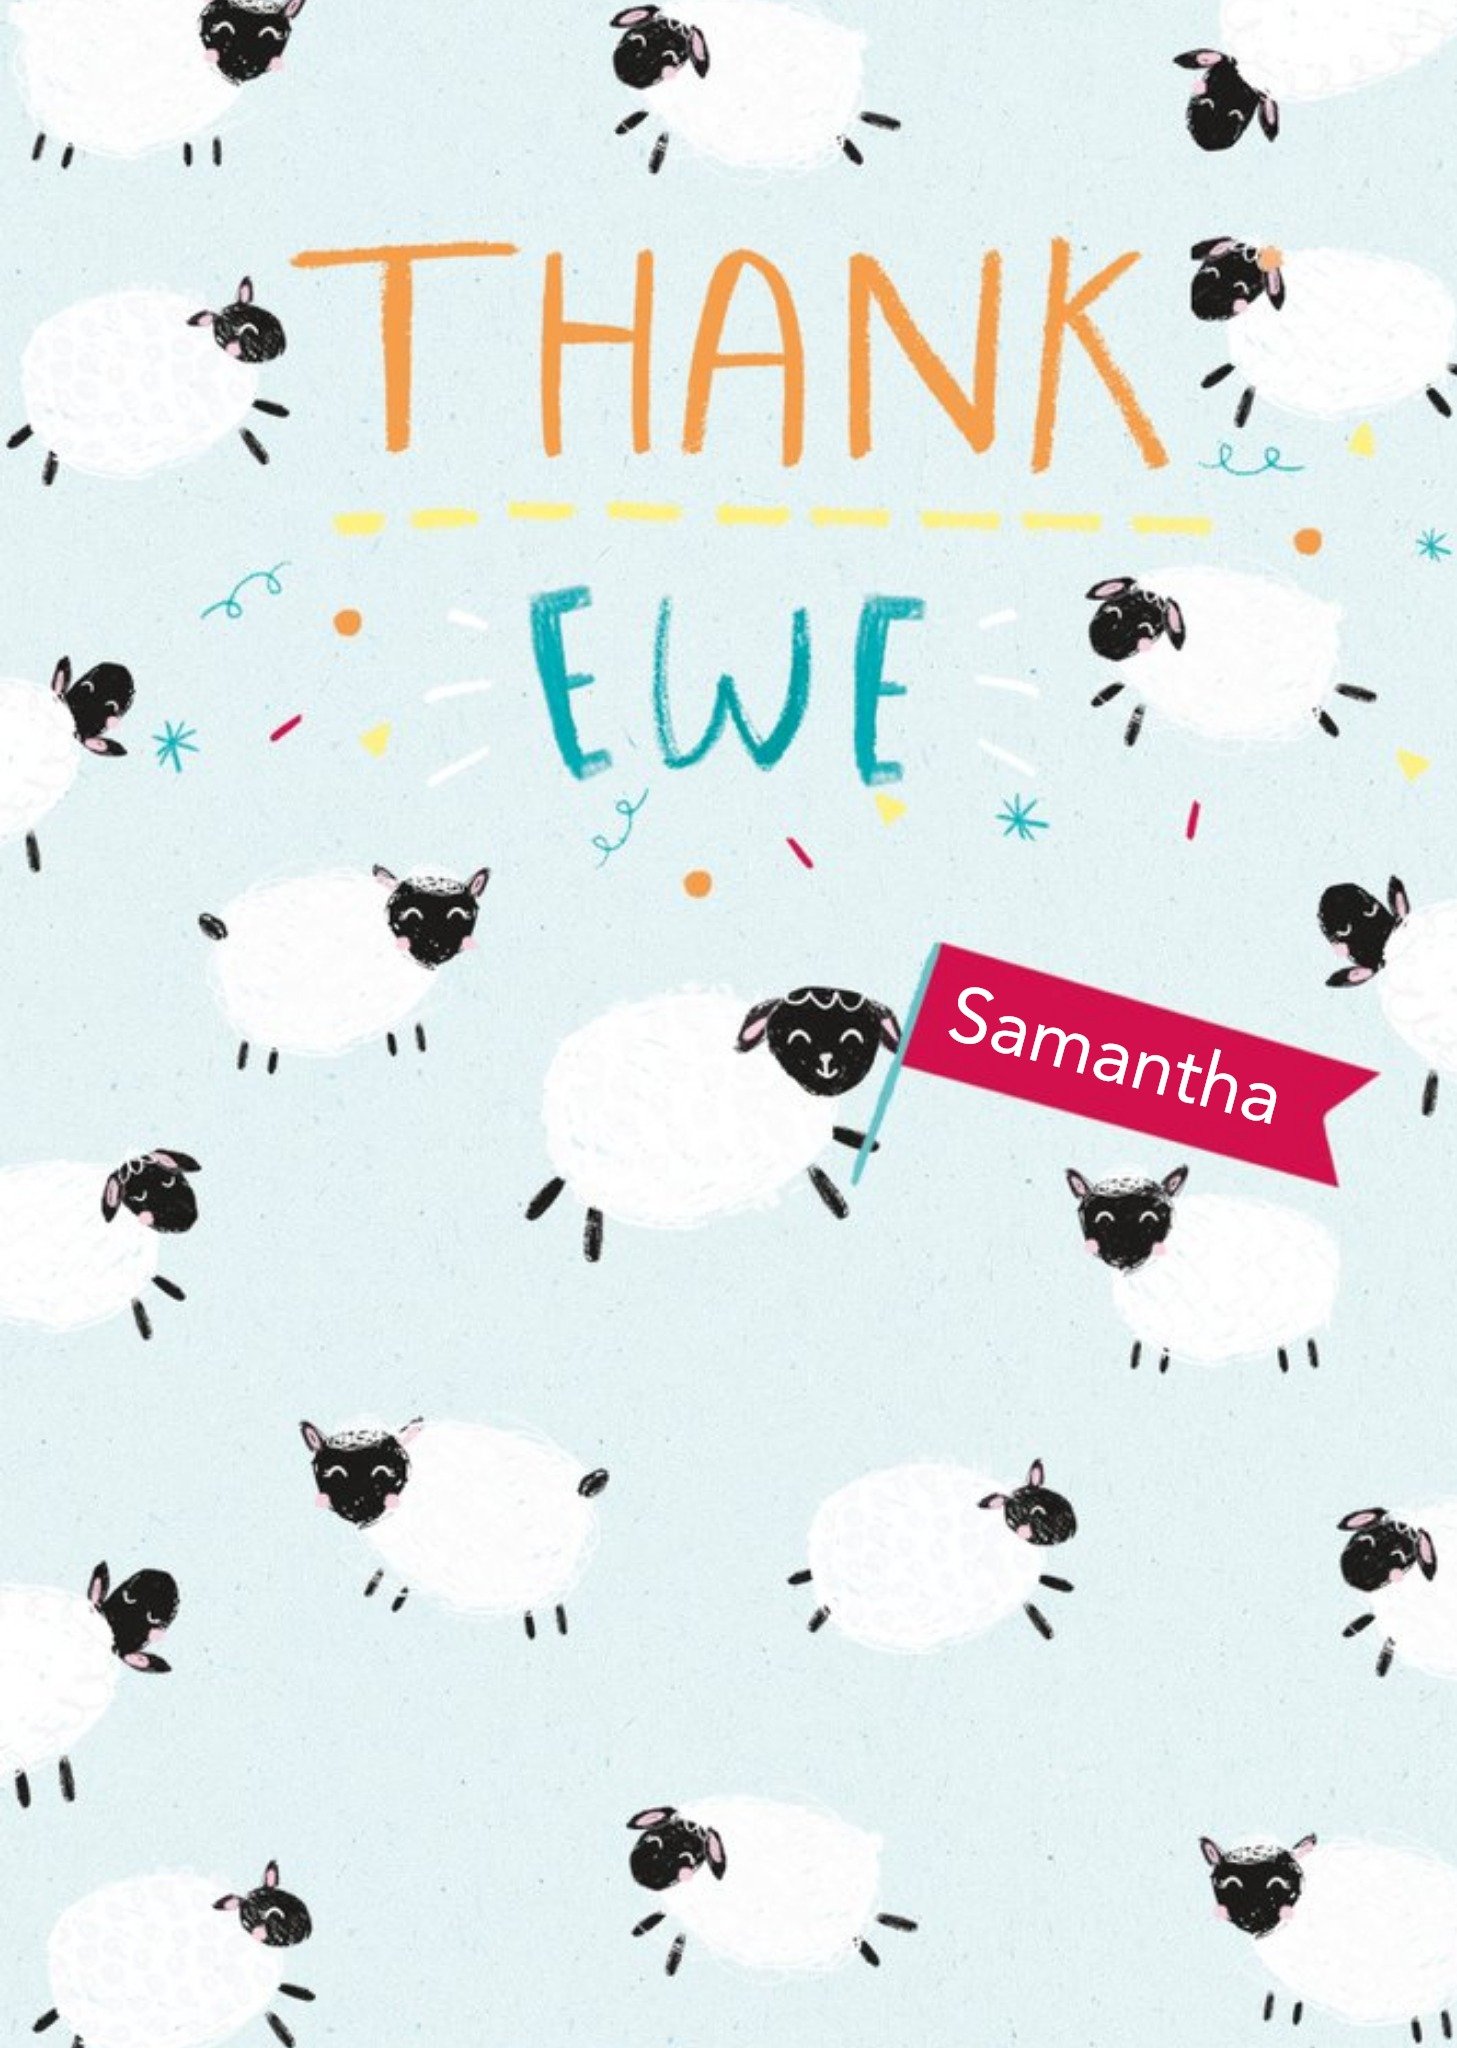 Moonpig Quirky Typography Surrounded By Illustrations Of Sheep Funny Pun Thank You Card Ecard